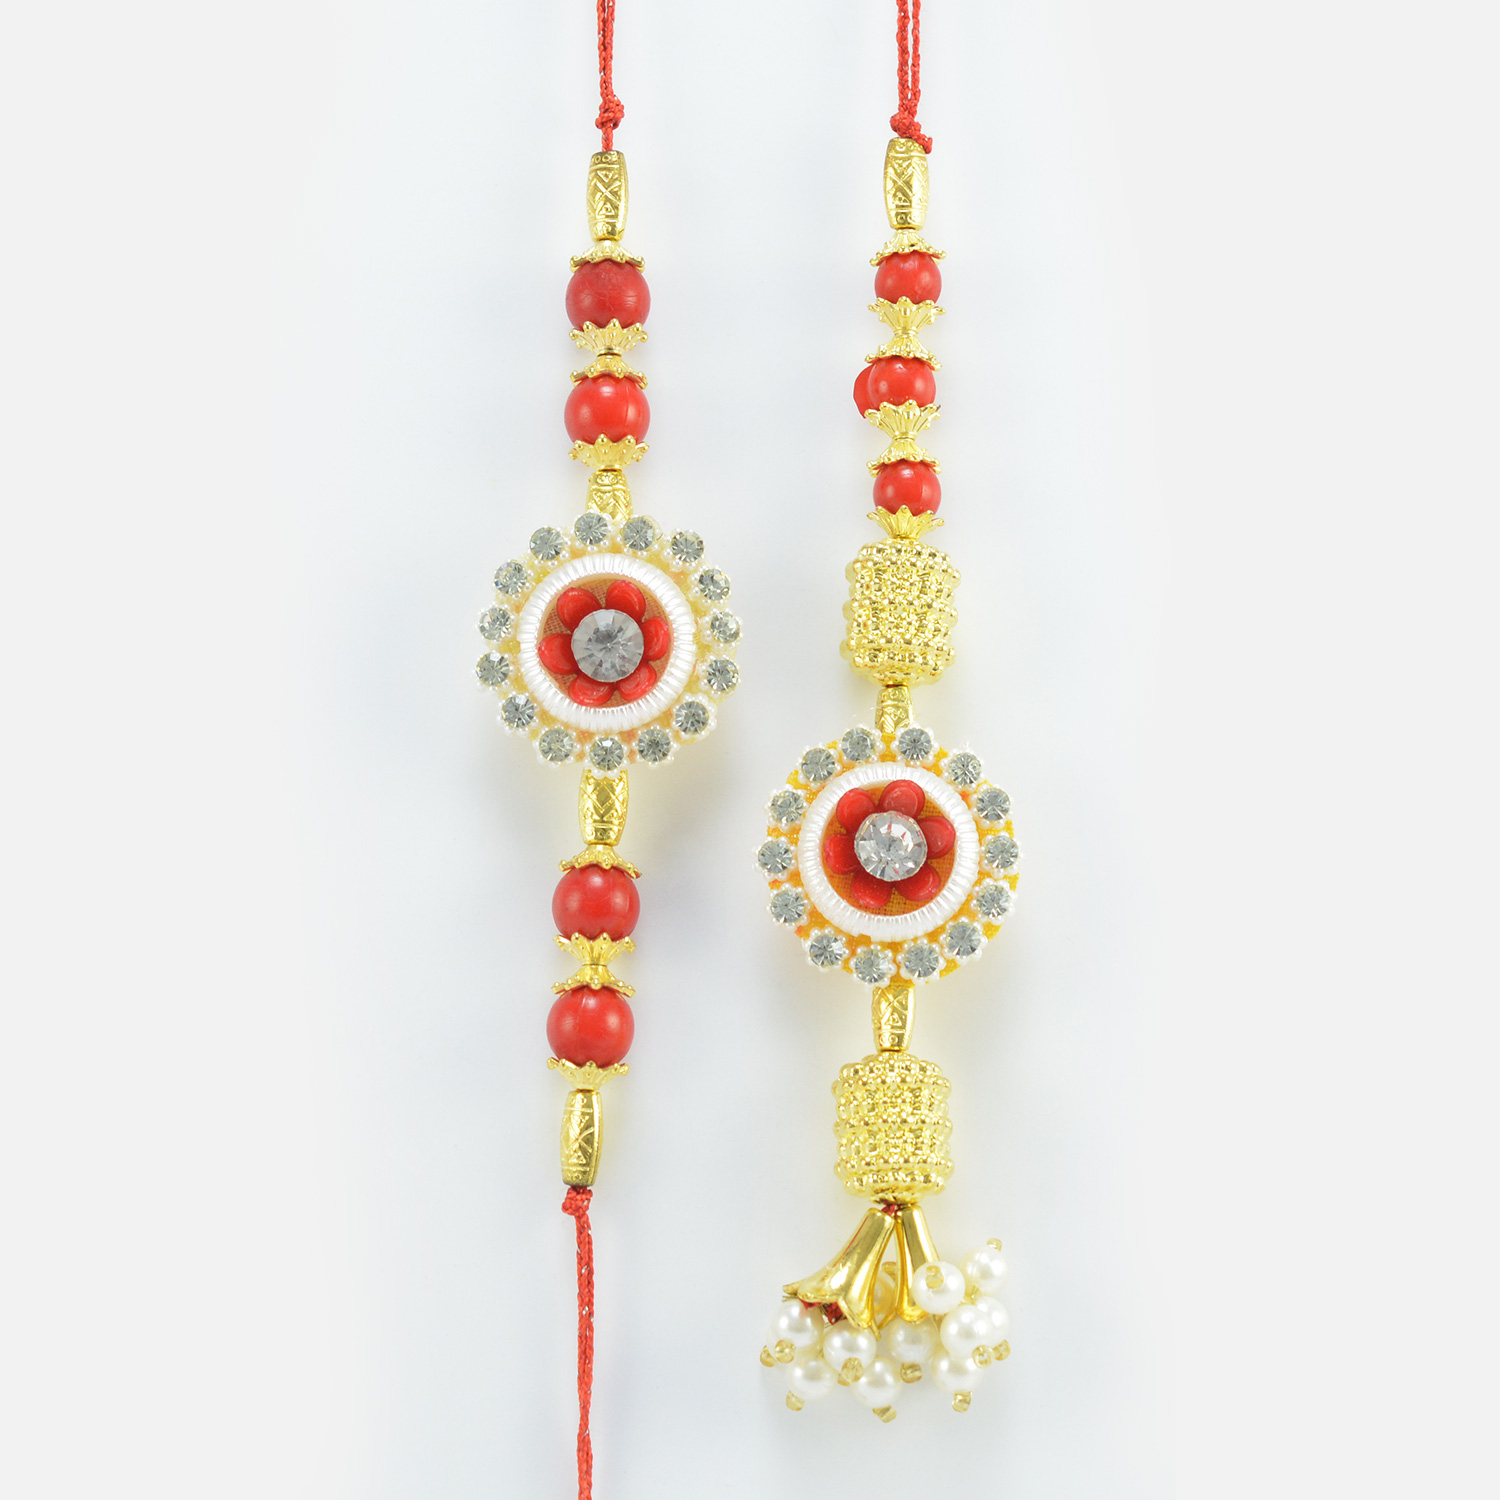 Flower Shape Design Red Beads and Golden Color Lumba and Brother Rakhi for Bhaiya and Bhabhi